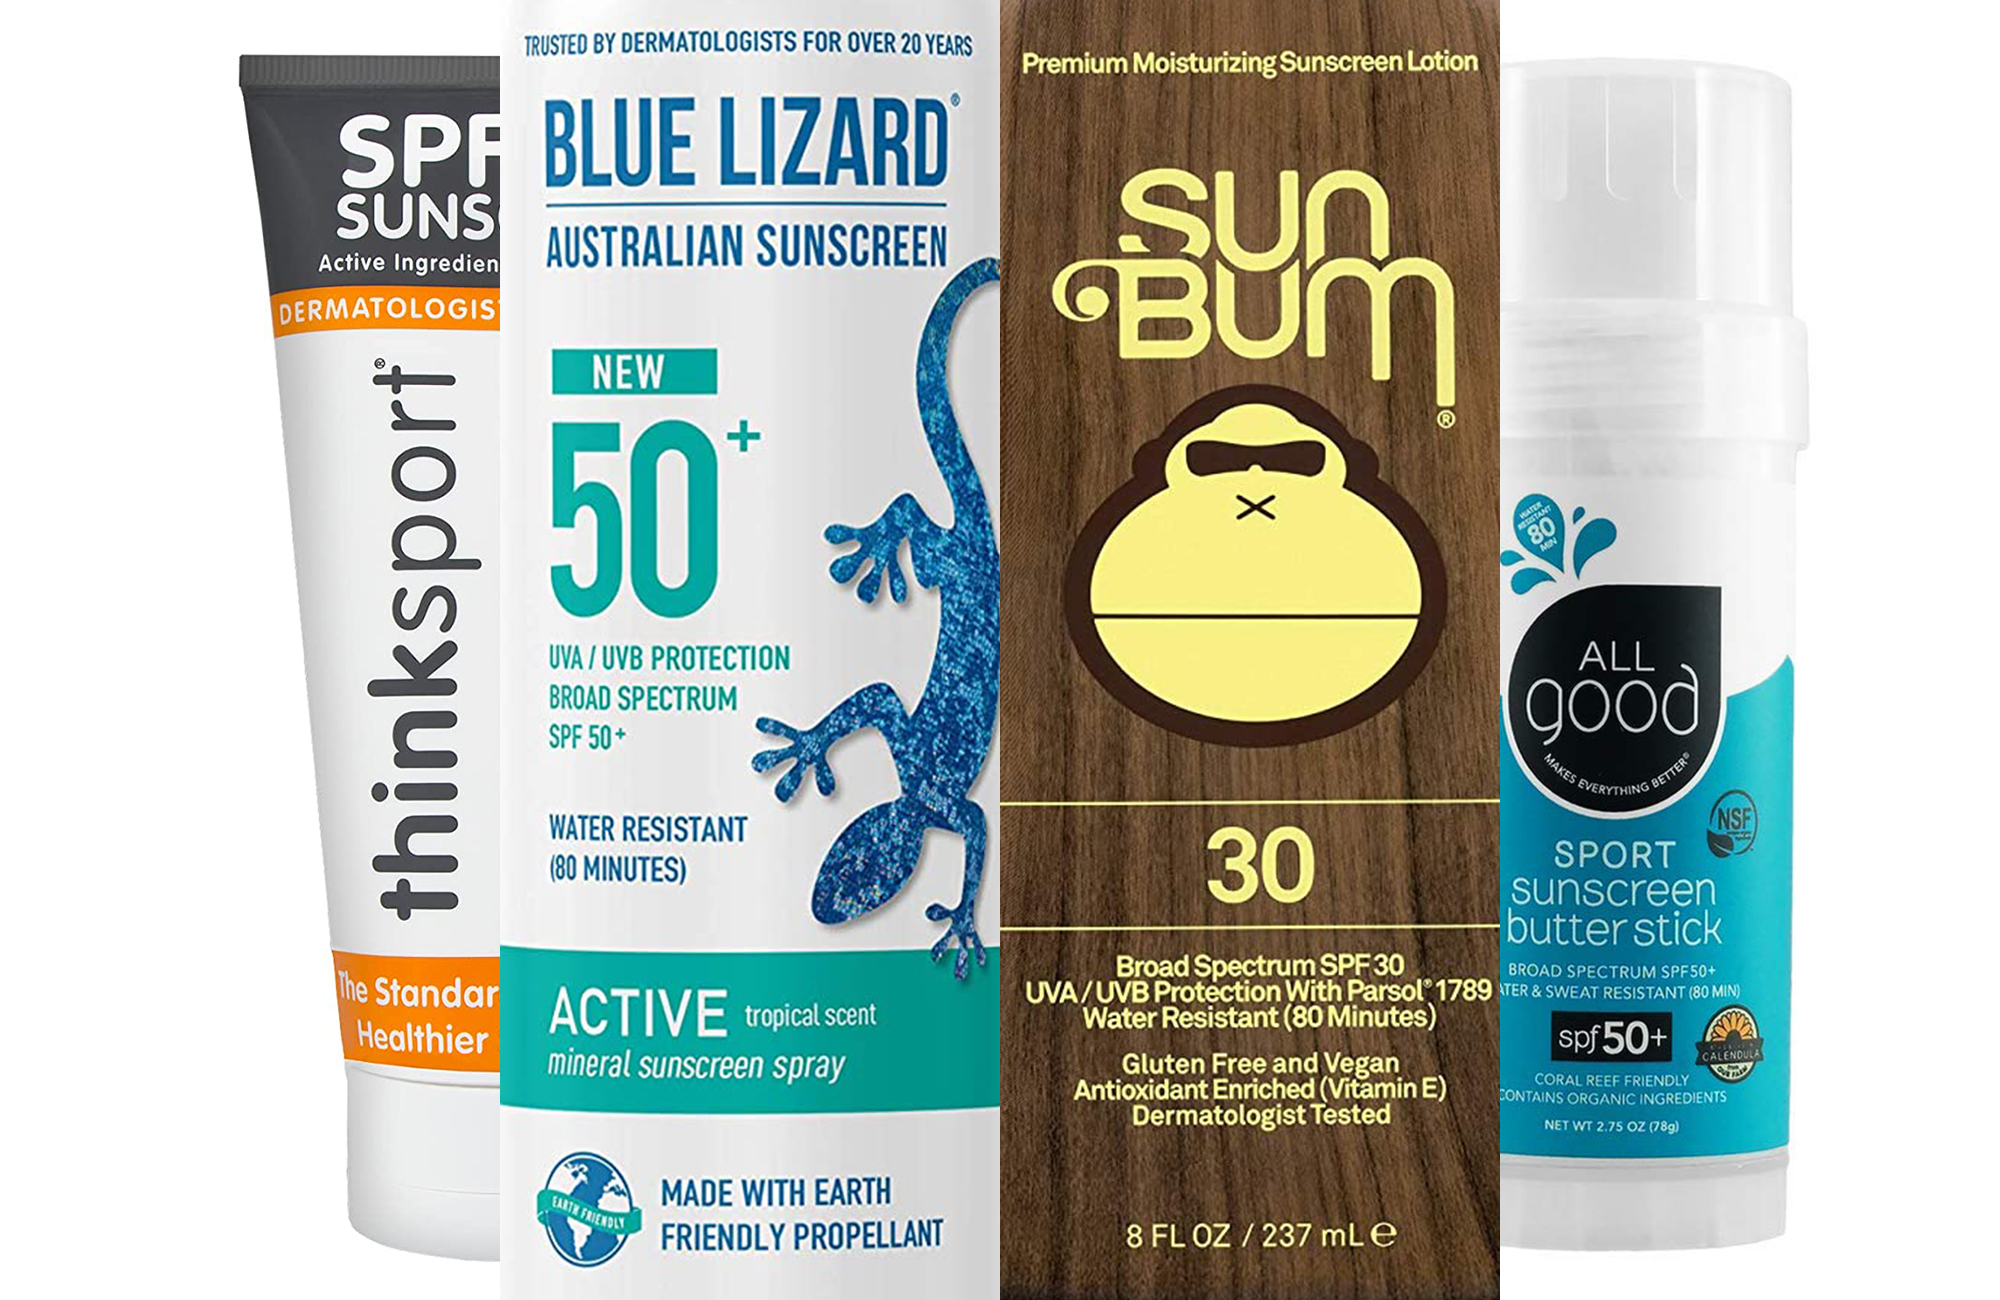 Reef friendly sunscreens only please!